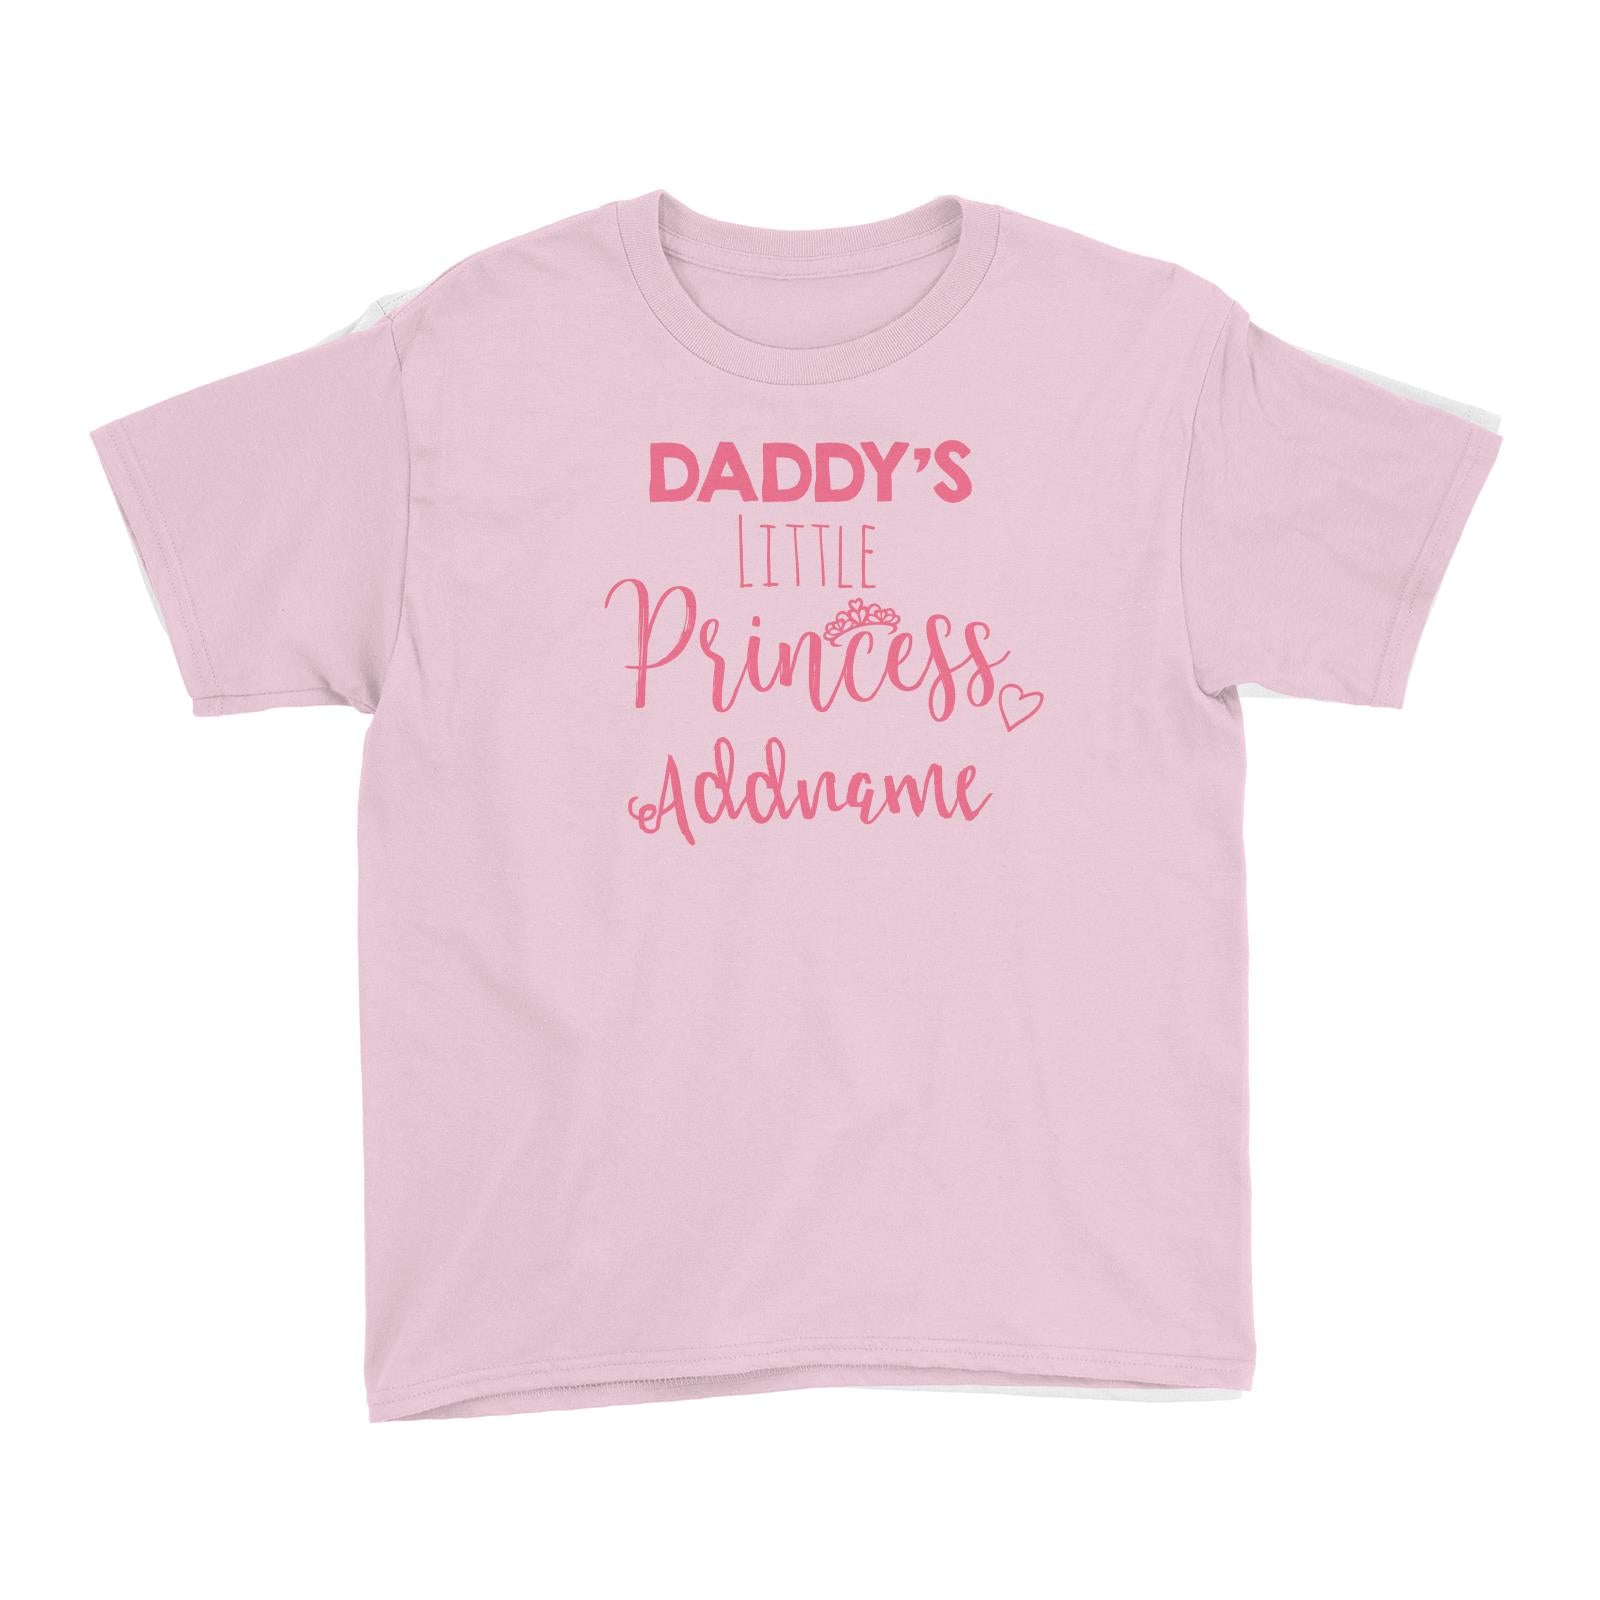 Daddy's Little Princess Addname Kid's T-Shirt